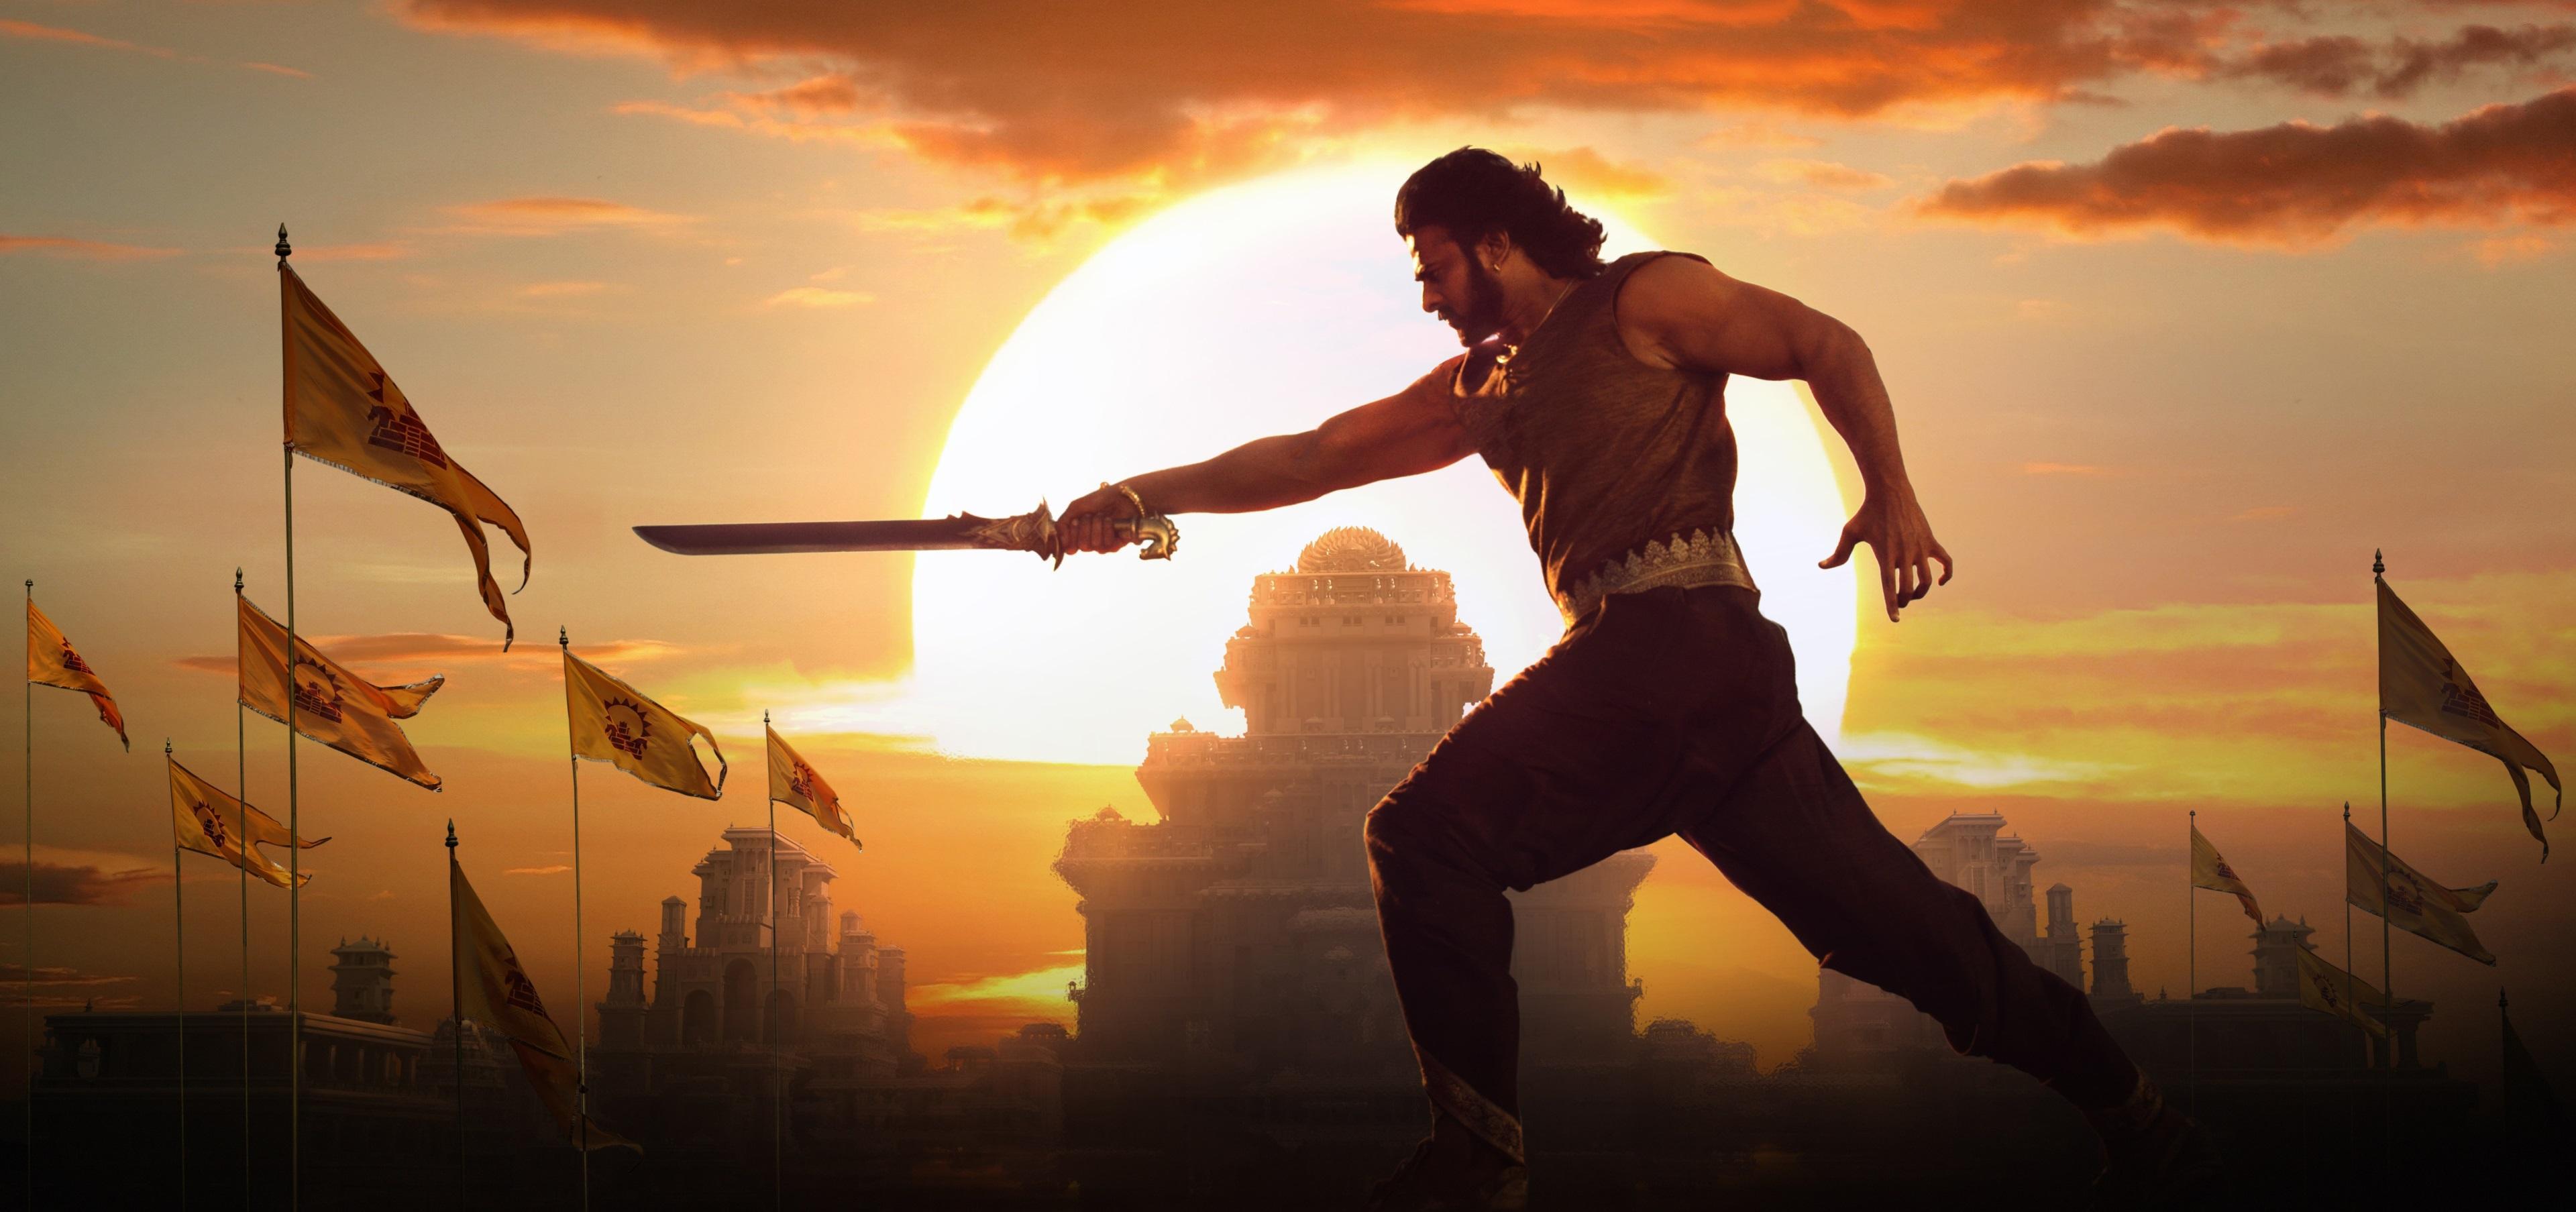 HD wallpaper, 3840X1807 Baahubali 2 The Conclusion 4K For Downloading